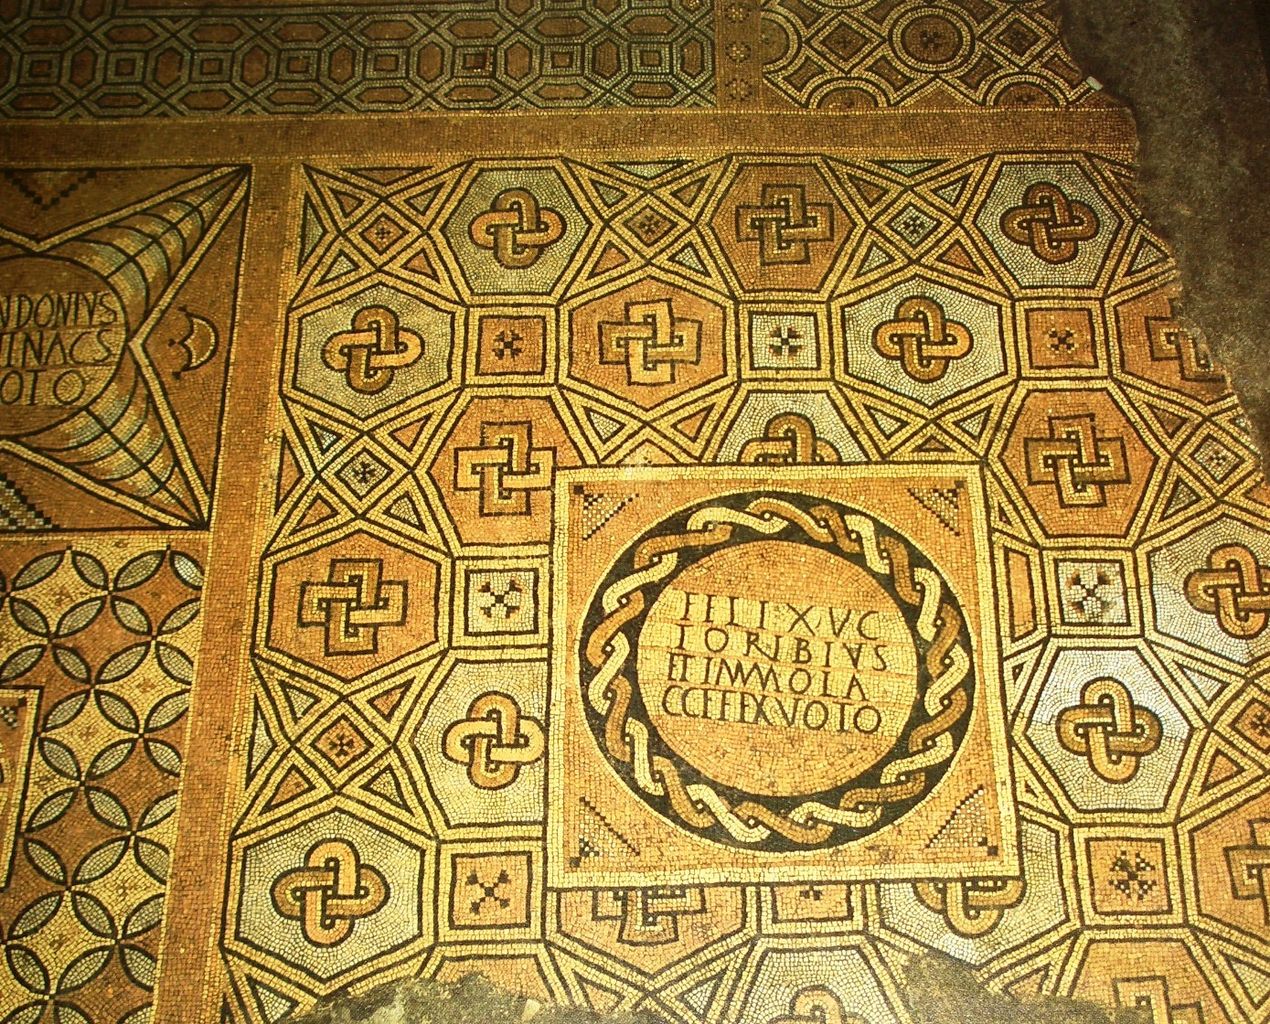 Central mosaic in the Basilica of St. Felix and St. Fortunatus